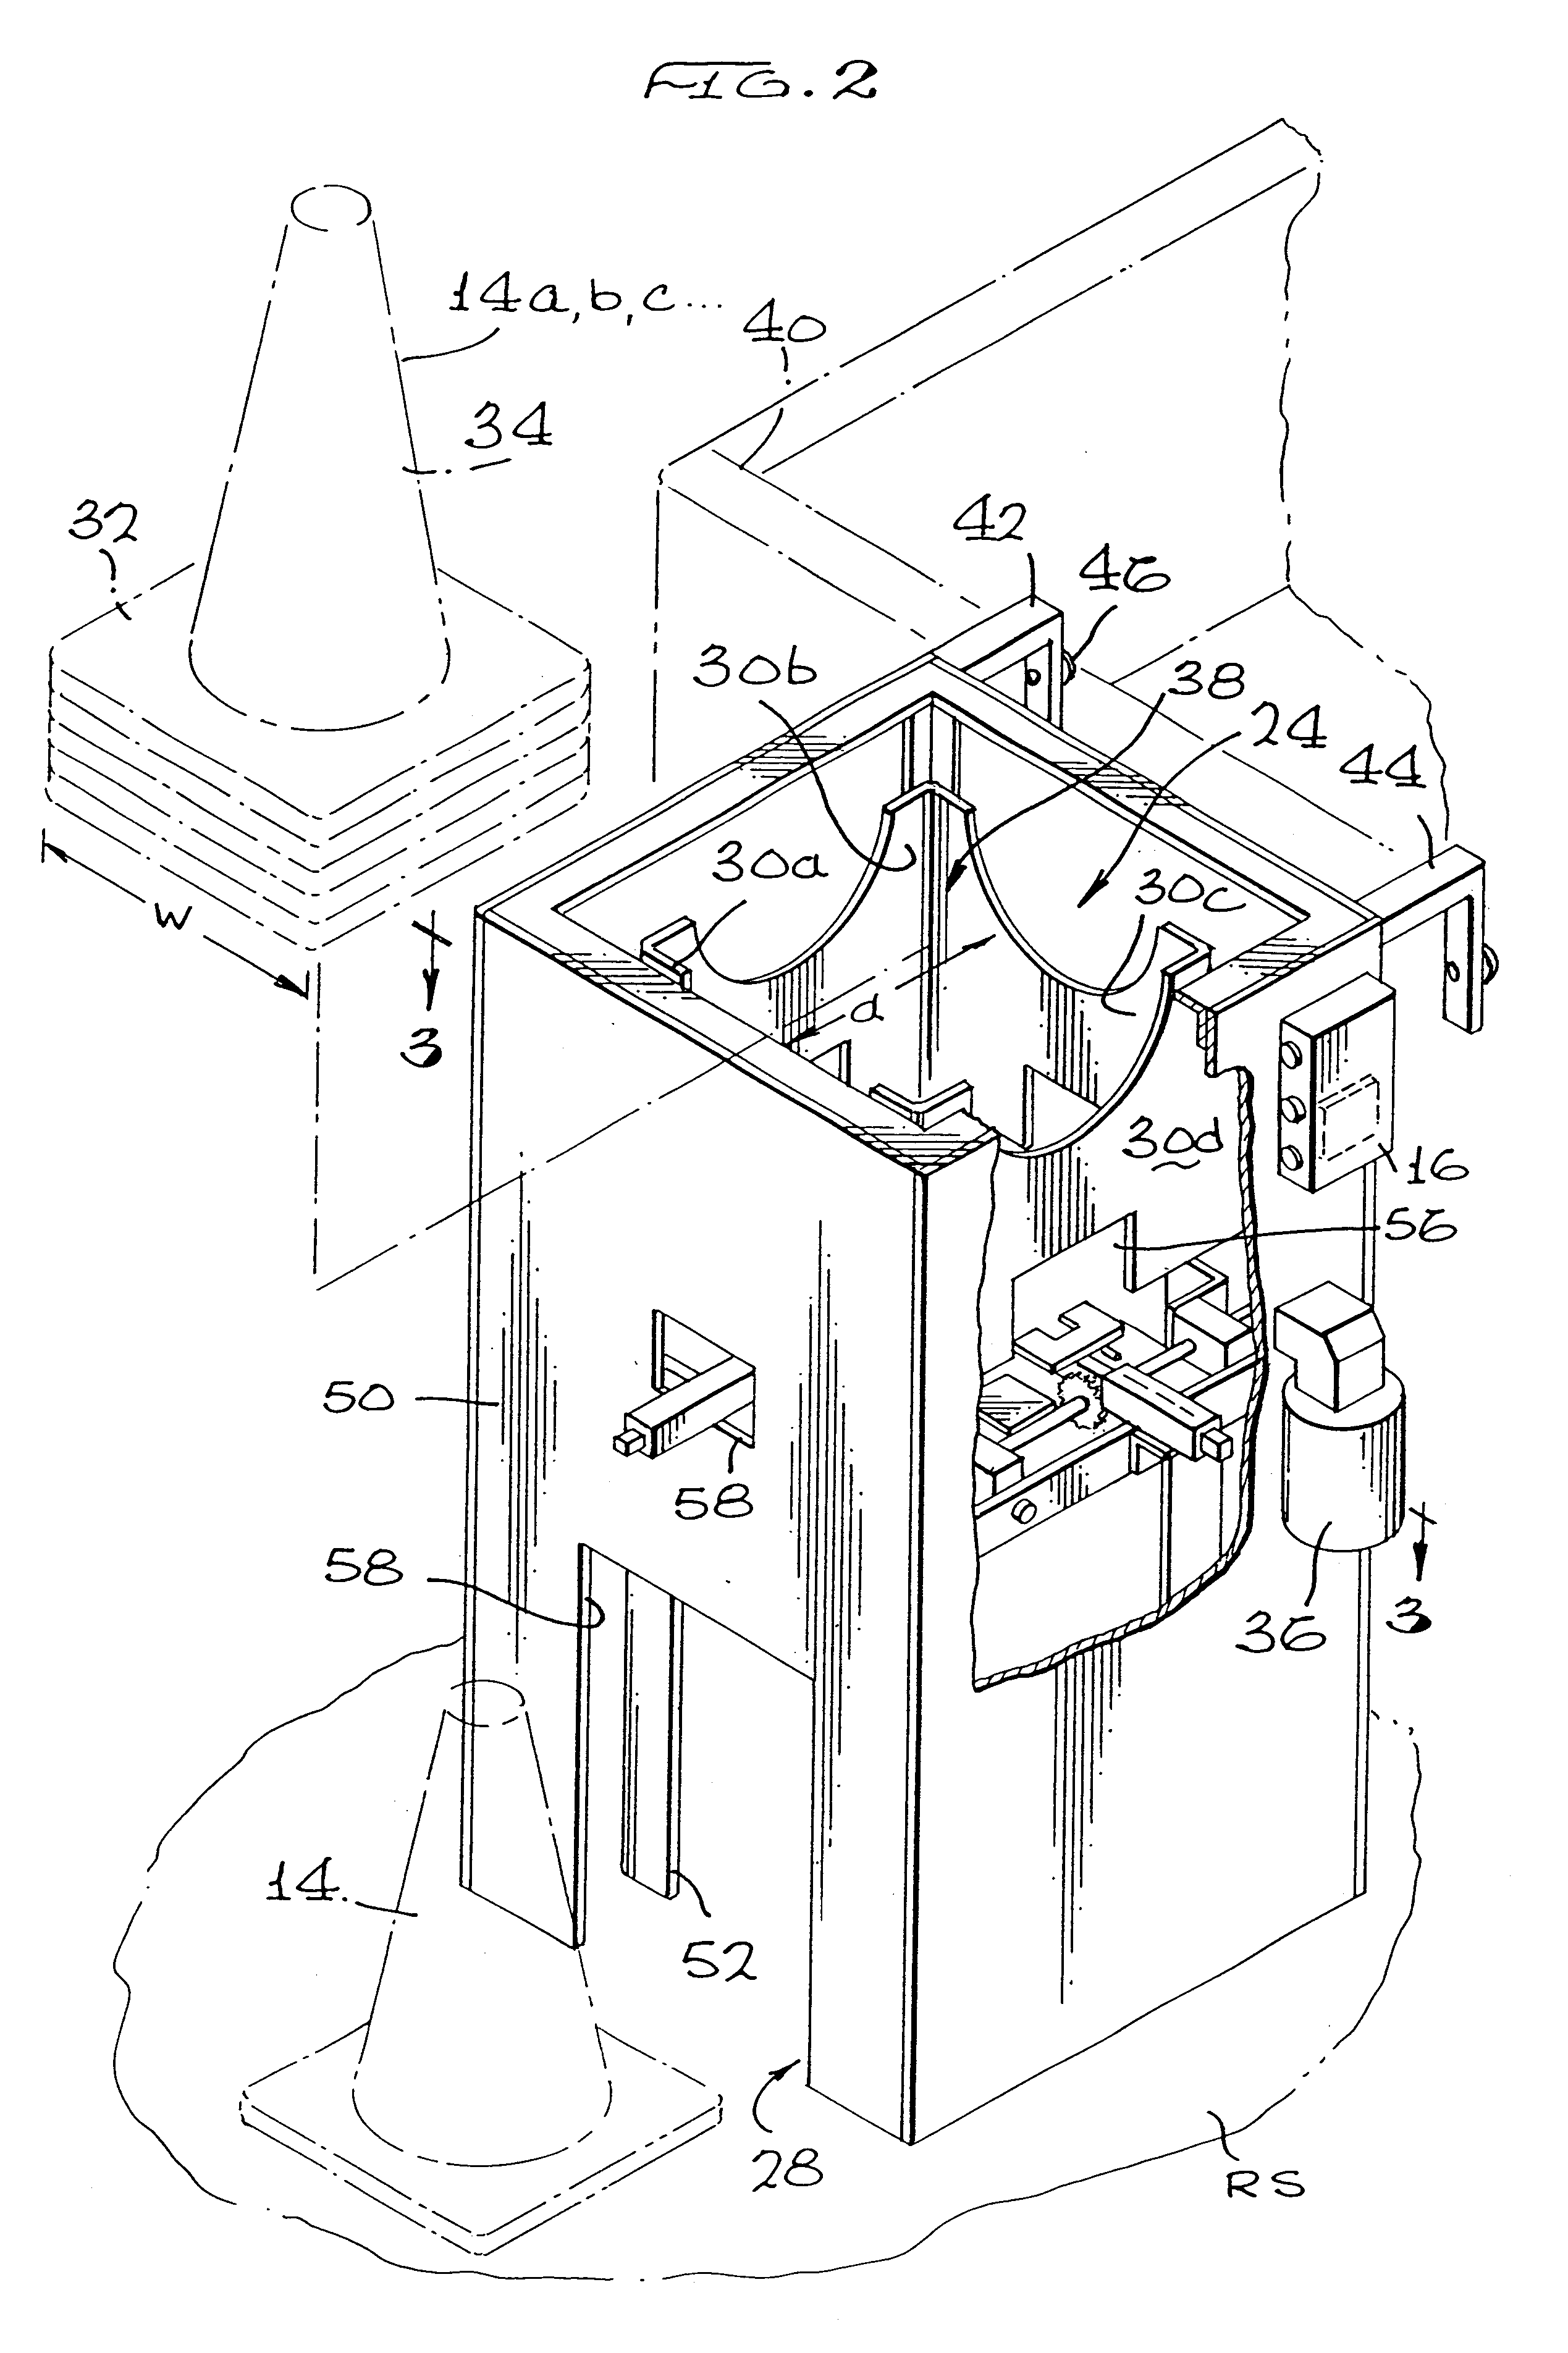 Device for placing cones on a roadway surface